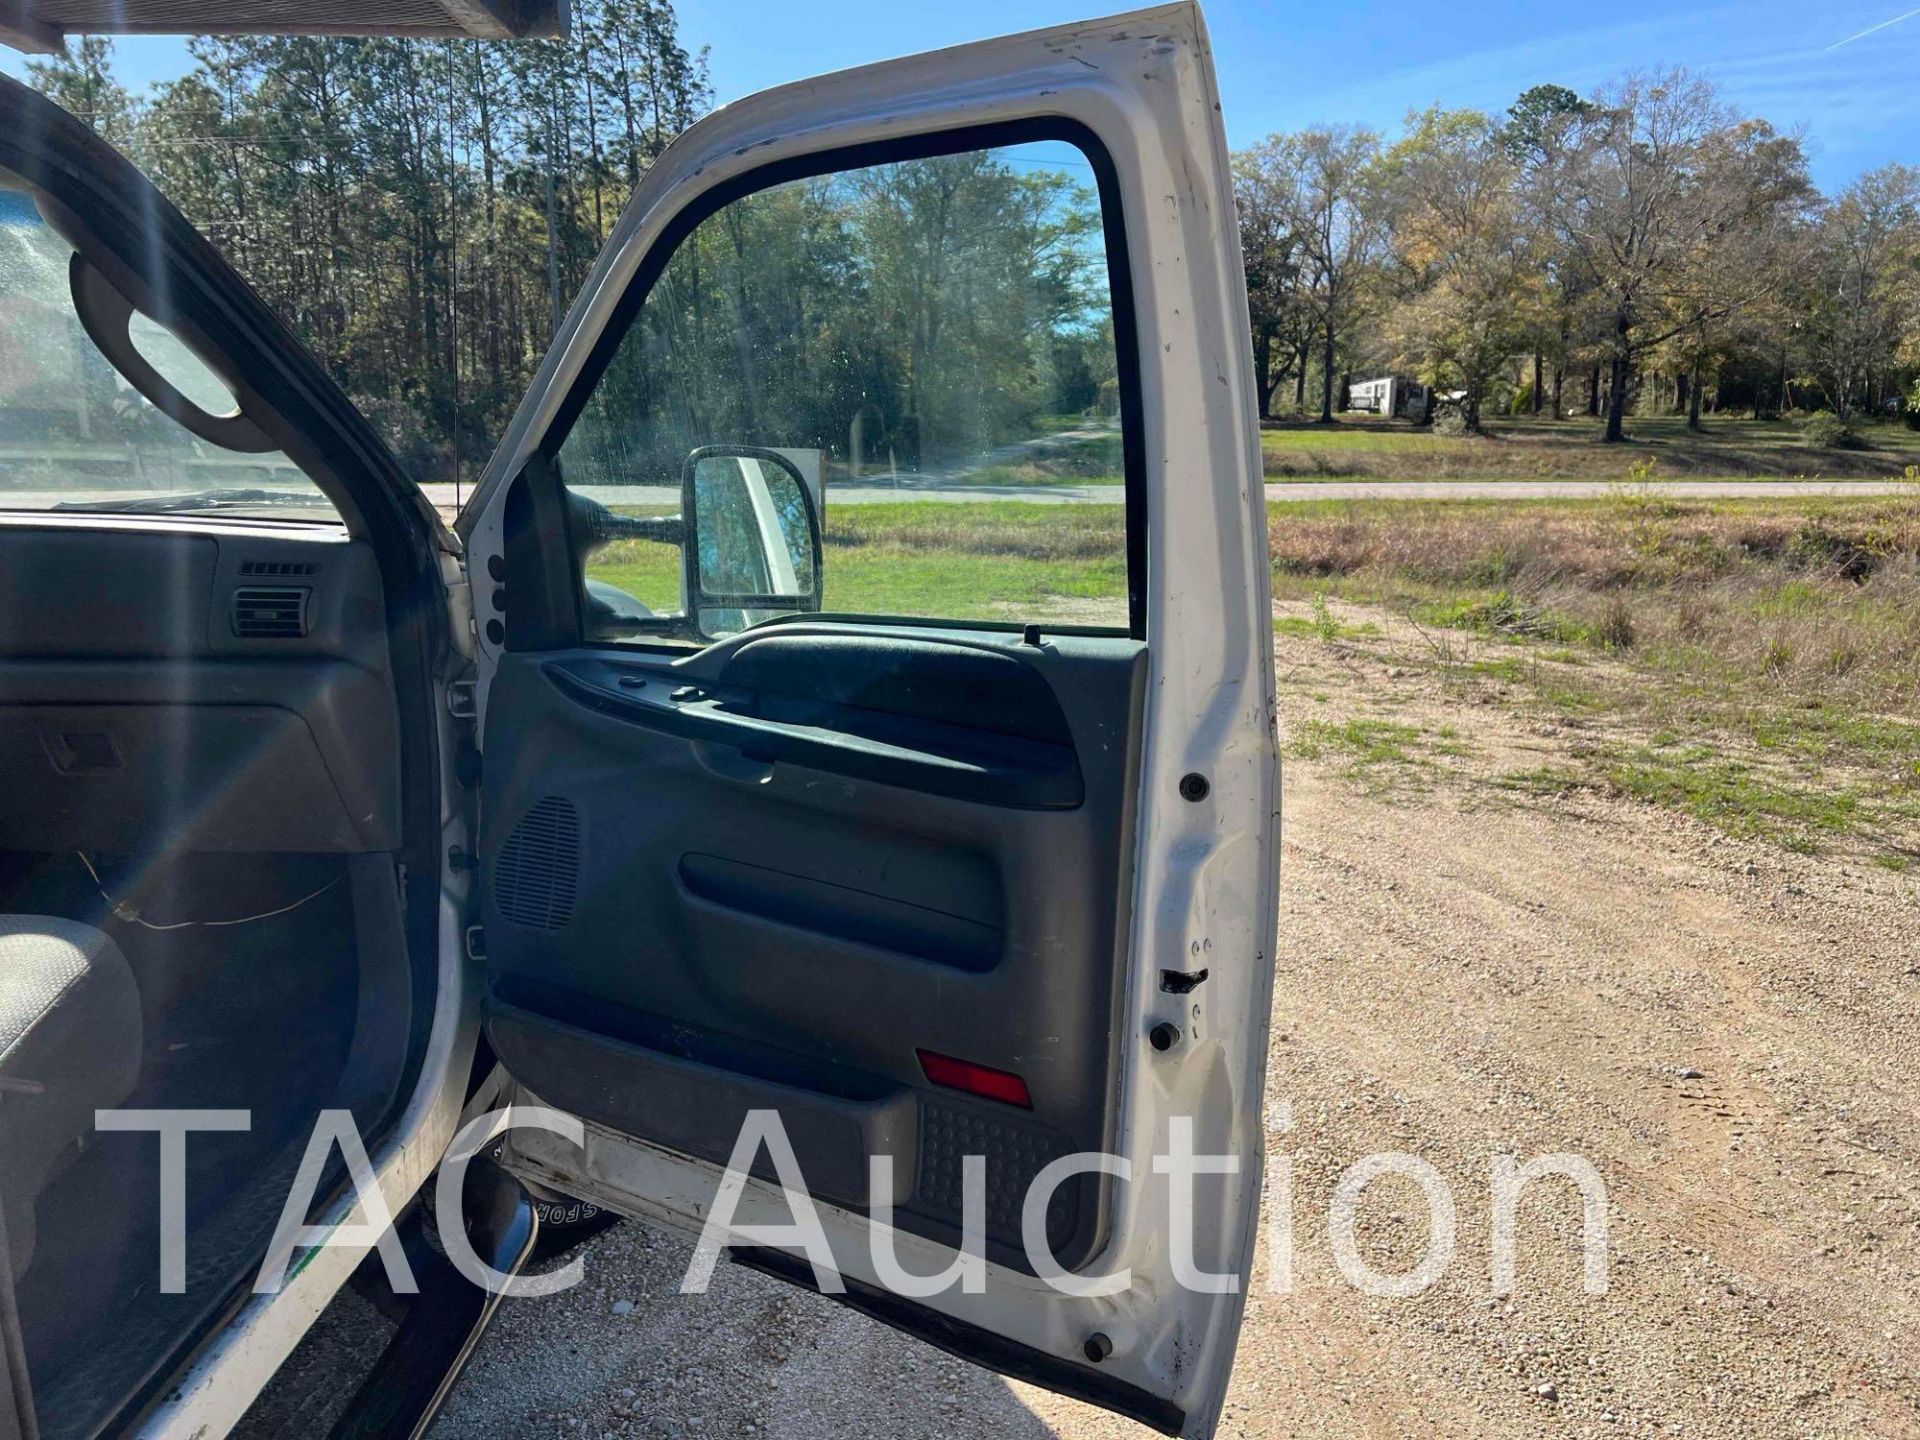 2005 Ford F350 4x4 W/ Landscape Body - Image 27 of 63